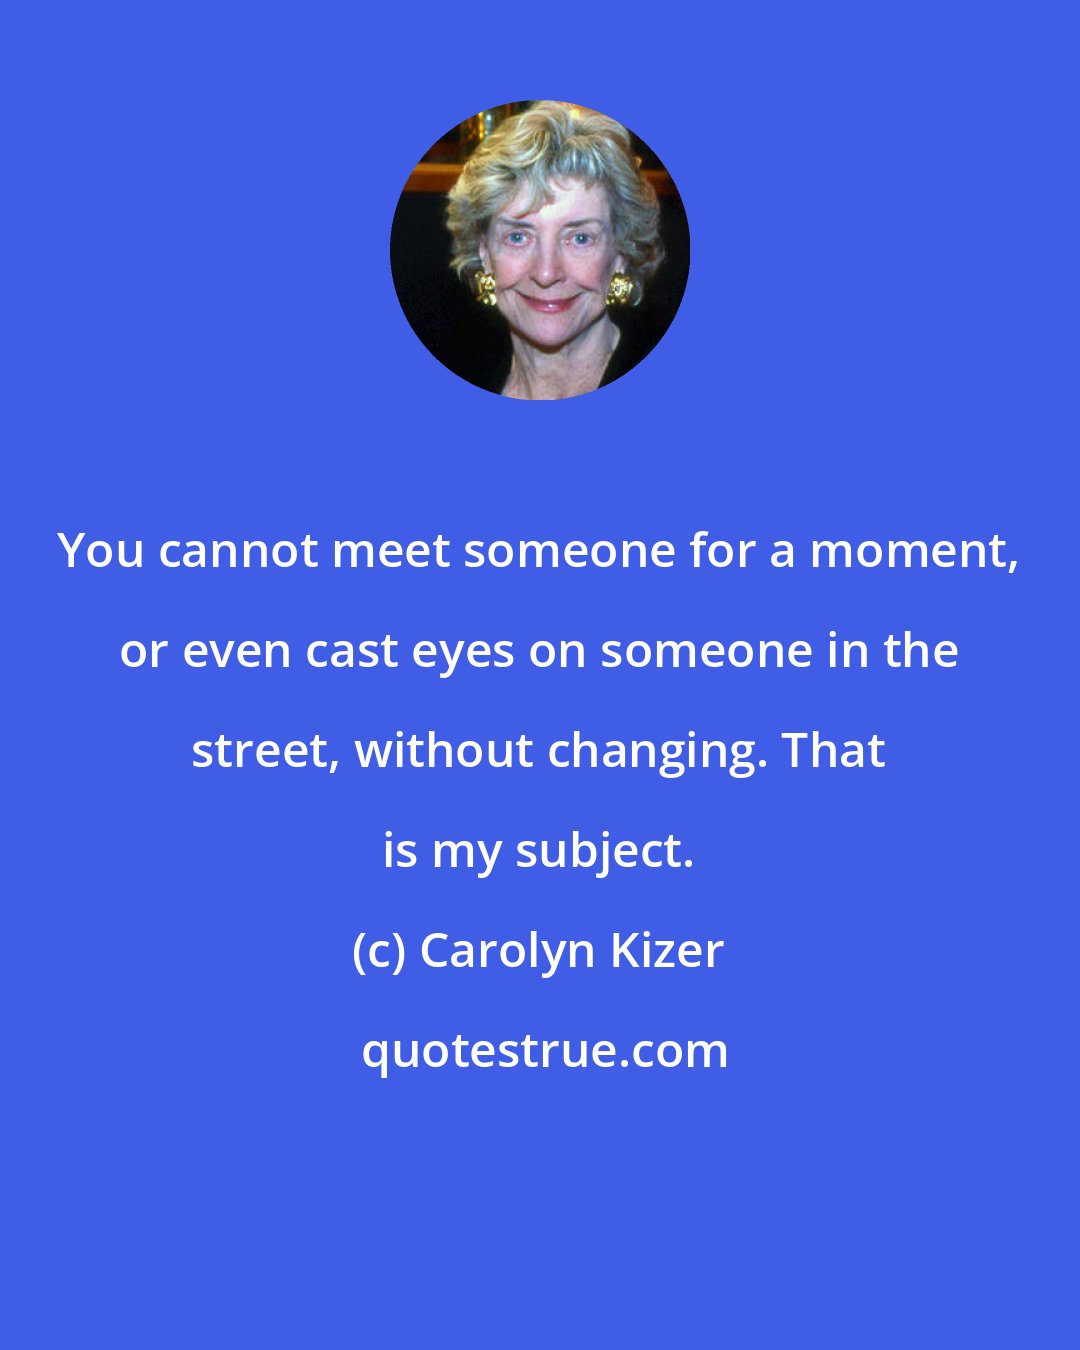 Carolyn Kizer: You cannot meet someone for a moment, or even cast eyes on someone in the street, without changing. That is my subject.